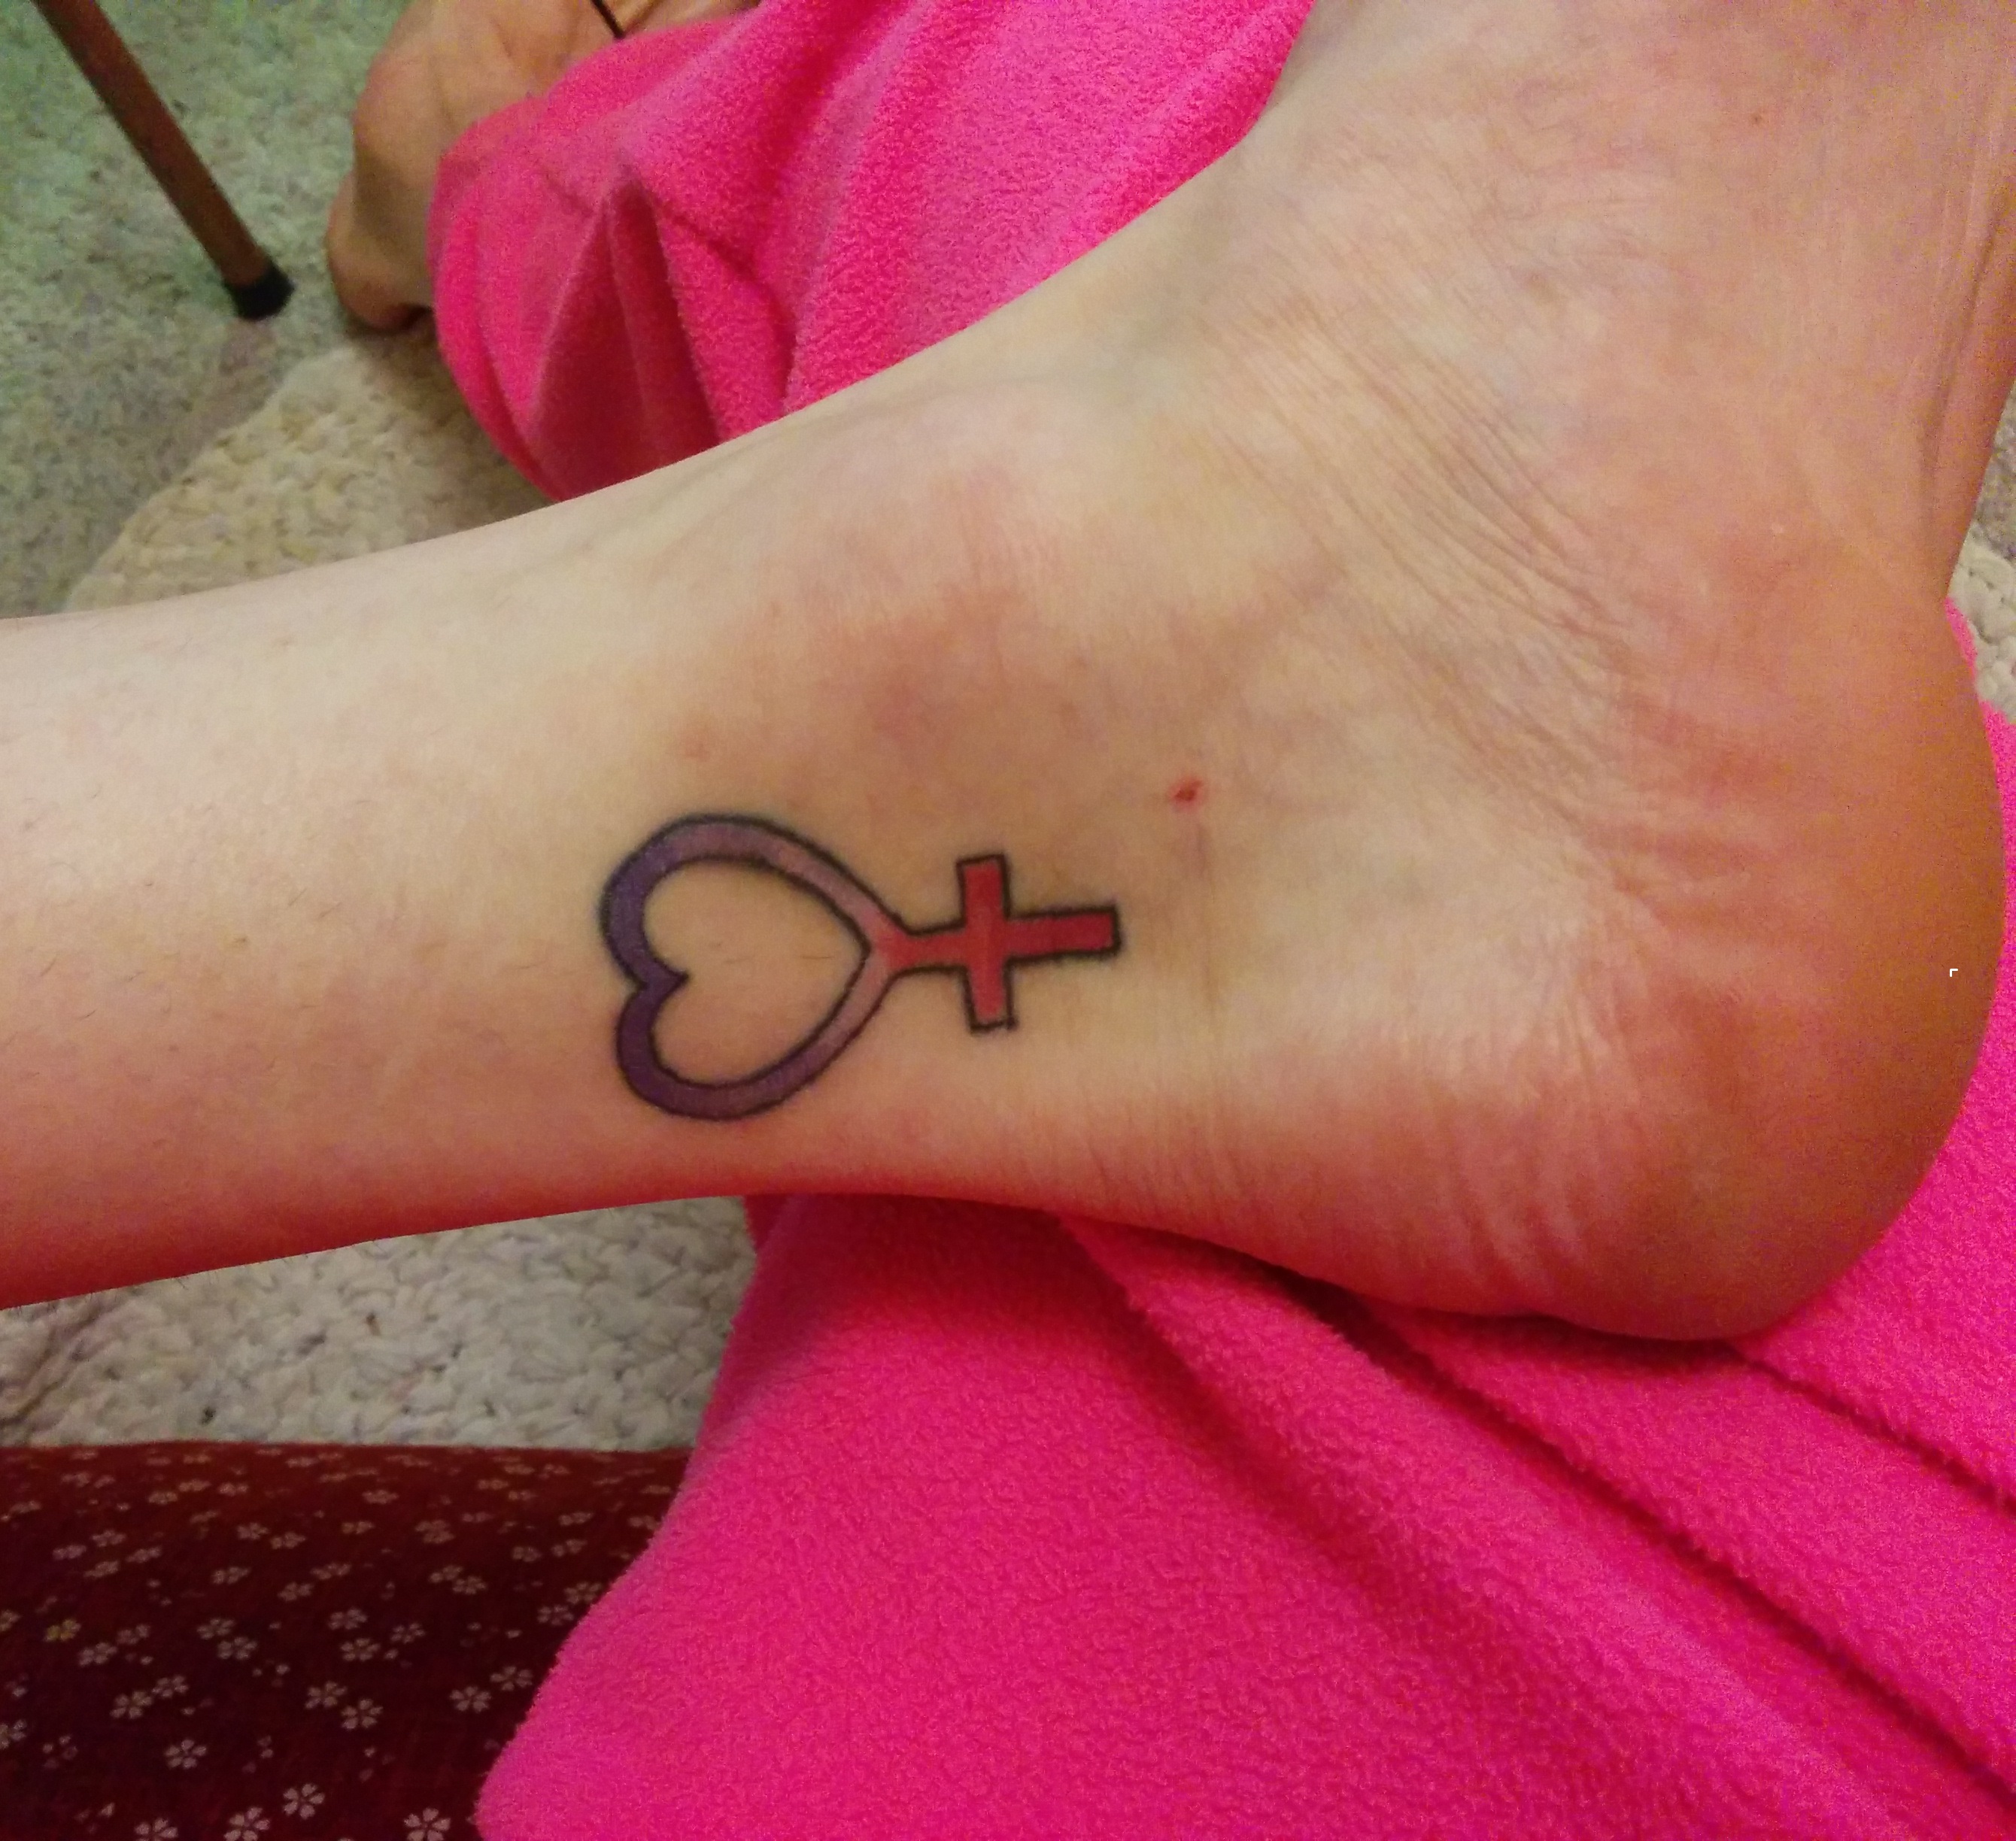 The female symbol, a little more healed